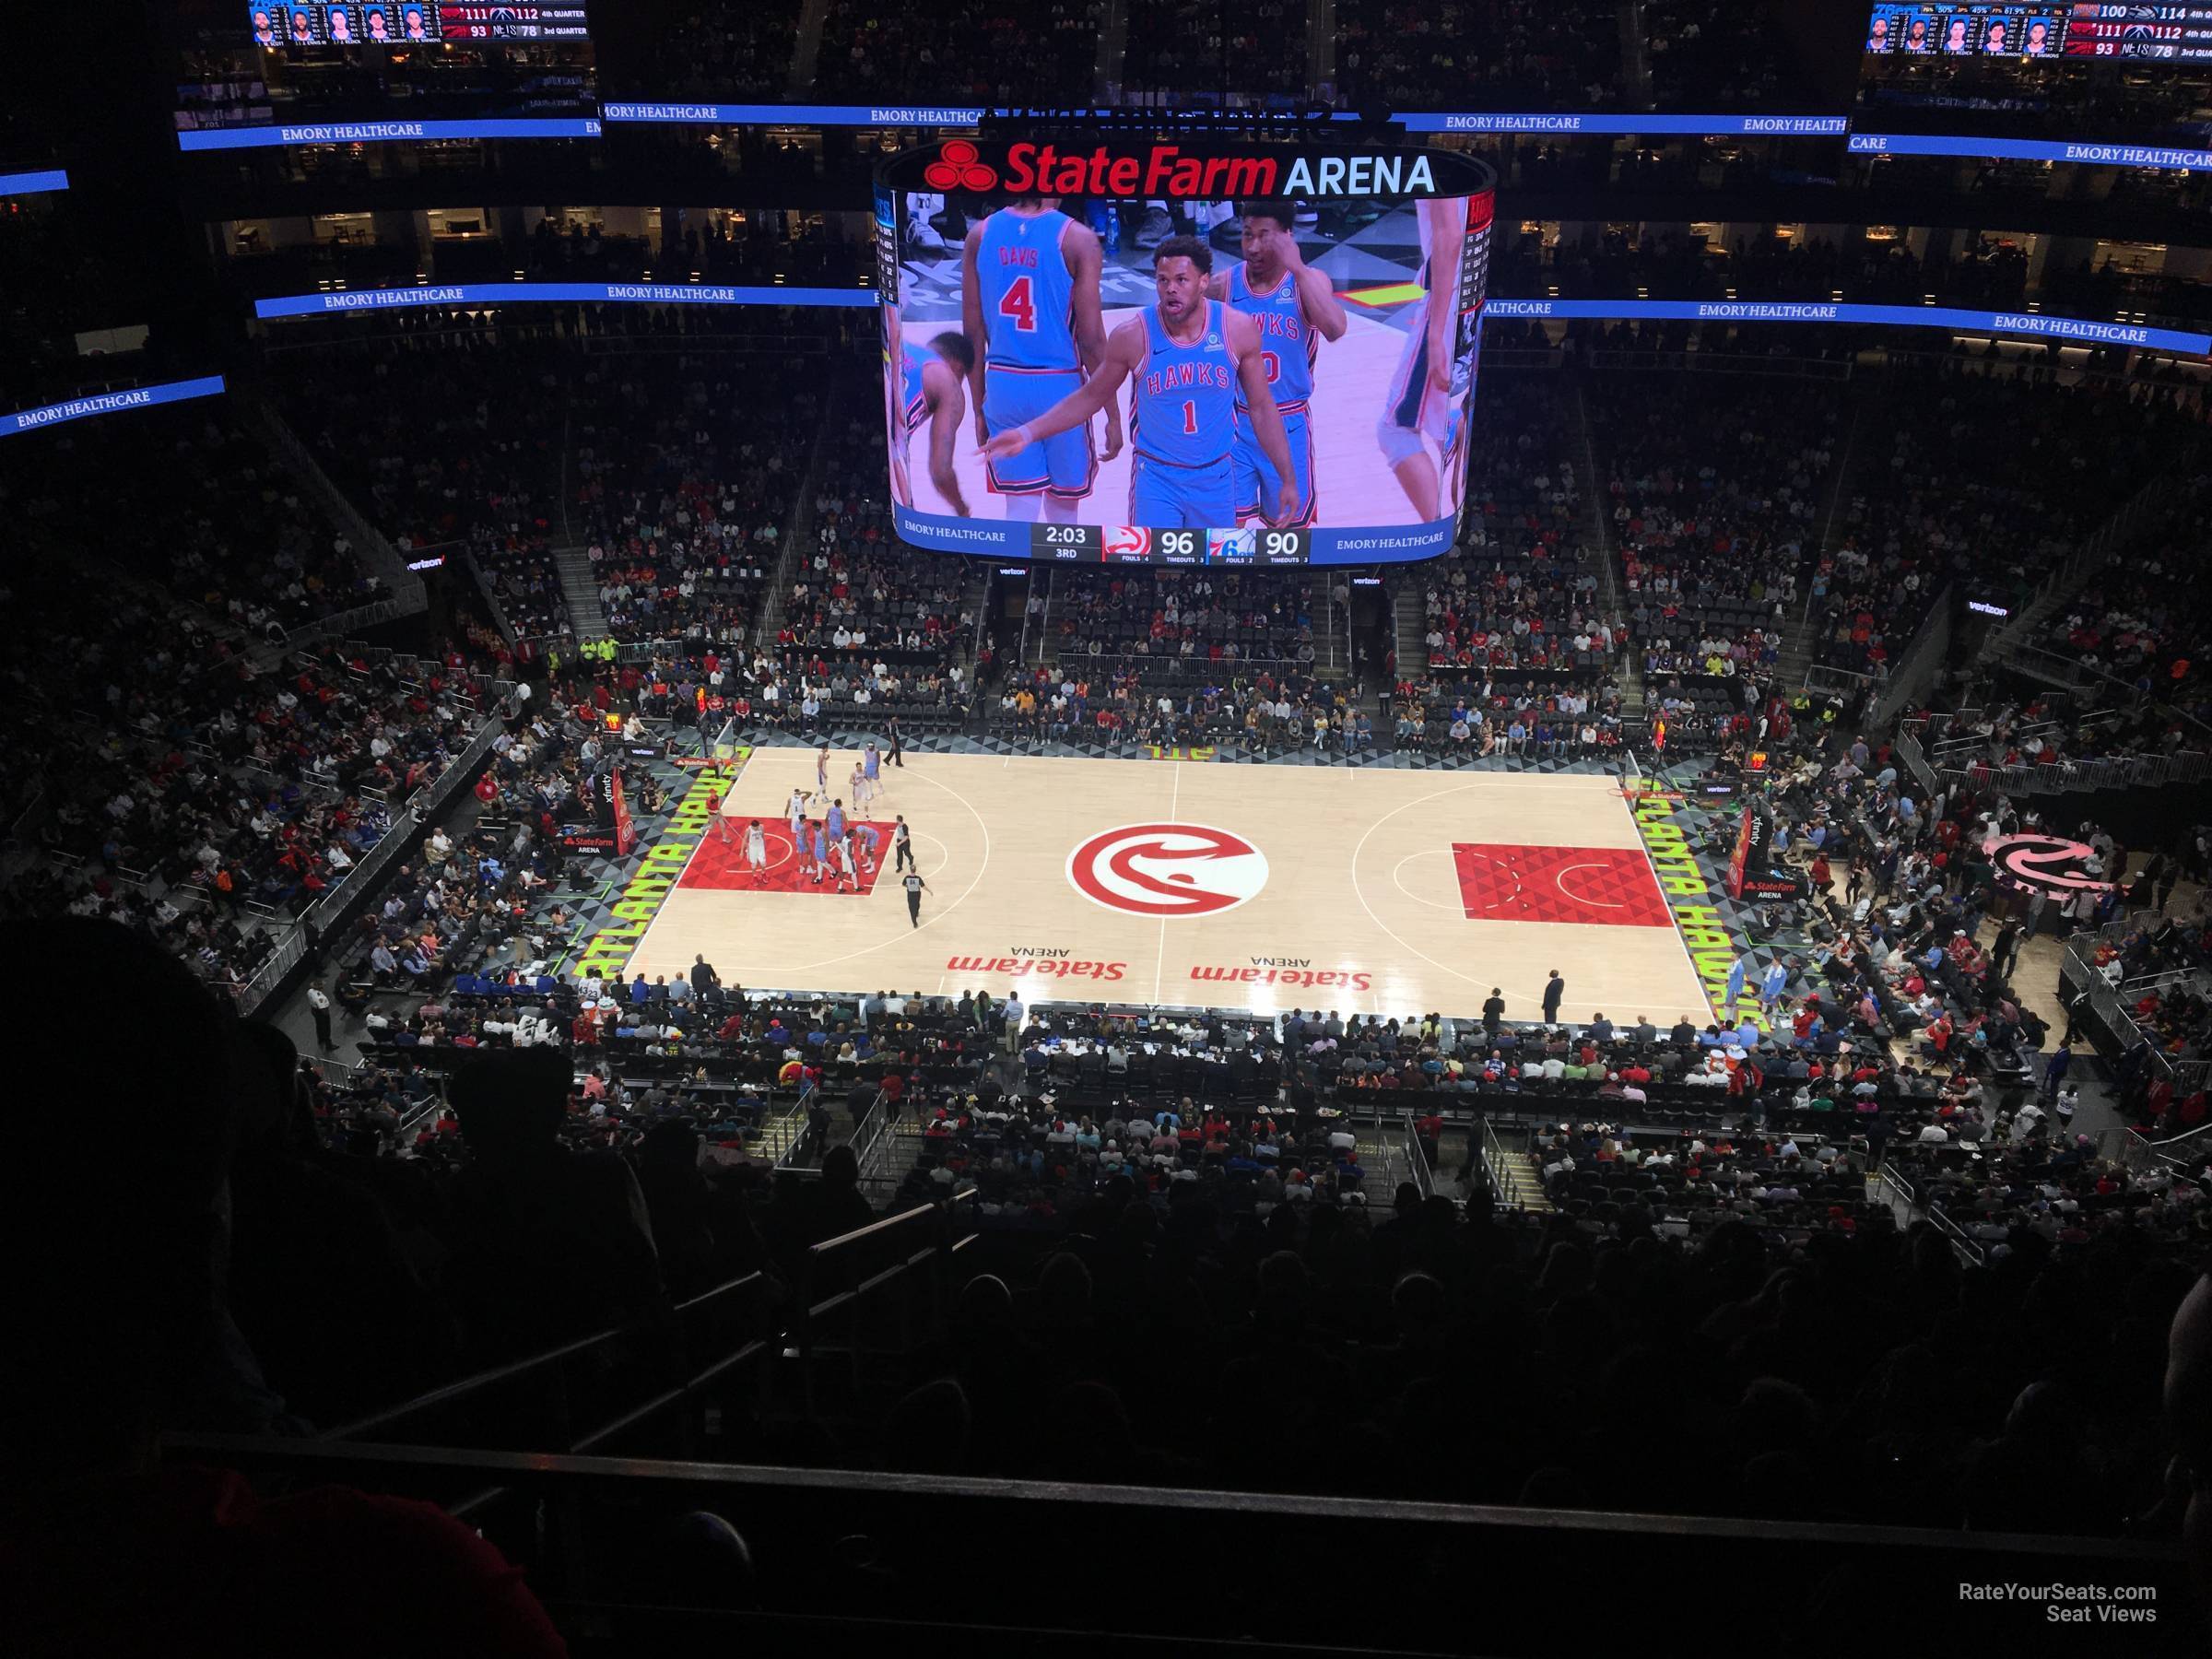 section 222, row n seat view  for basketball - state farm arena